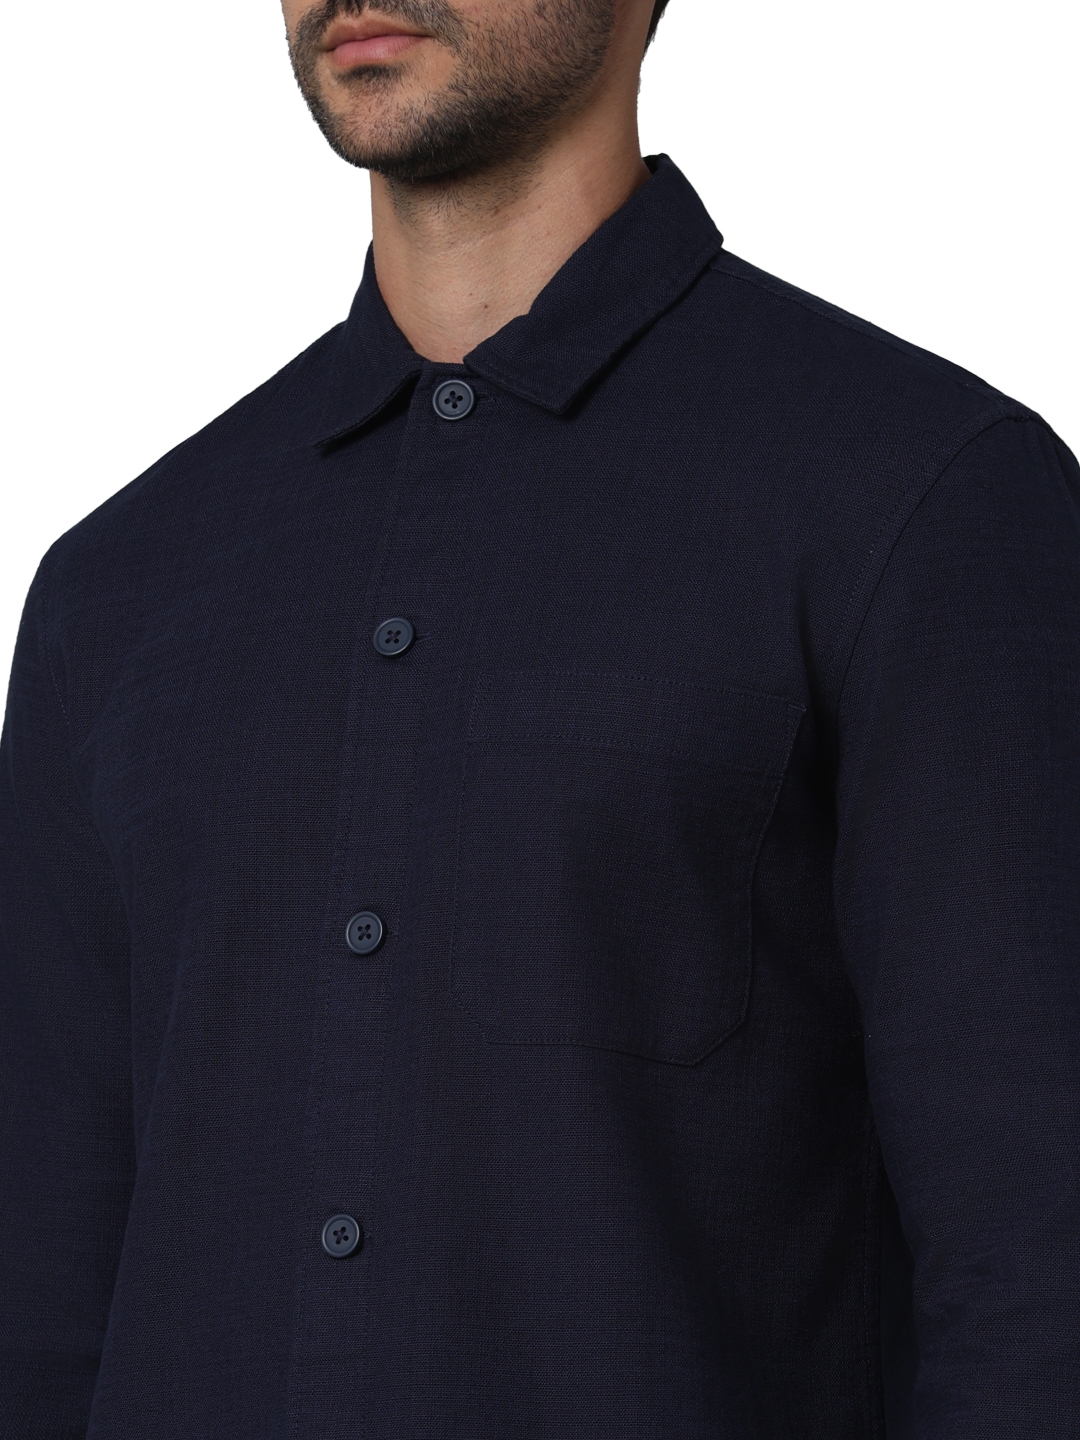 Celio Men Navy Blue Solid Oversized Cotton French Collar Casual Shirt